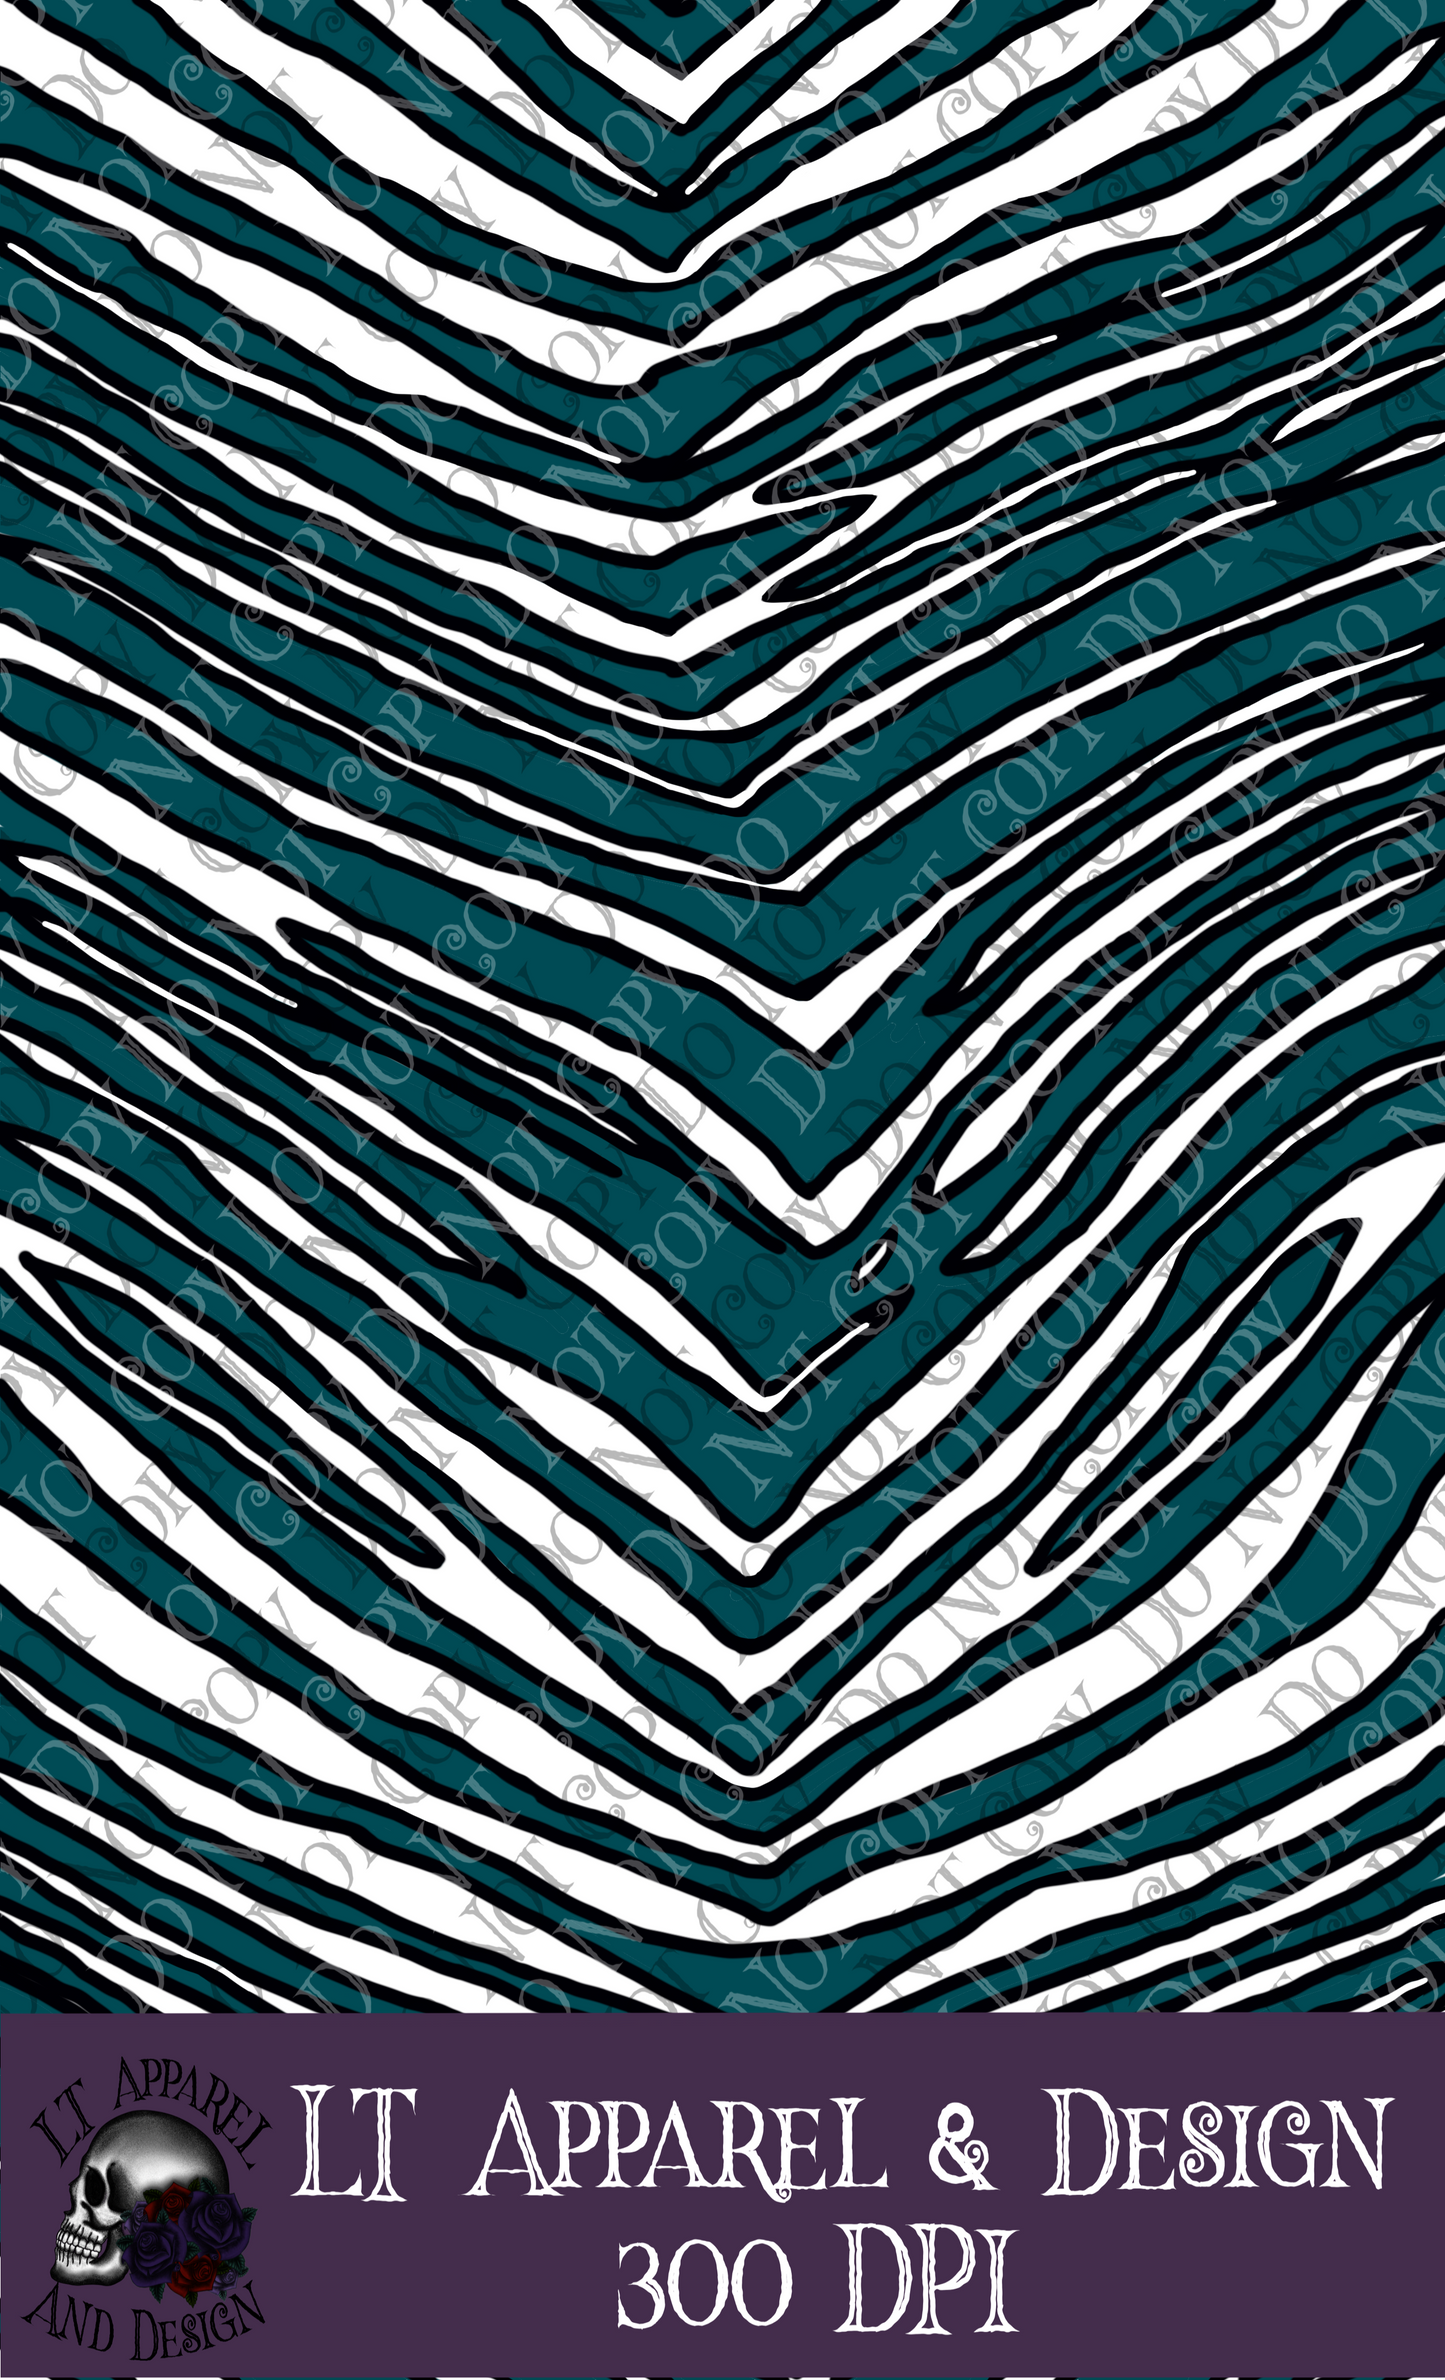 Zebra Sheet Not Seamless Teal, Black and White: PNG